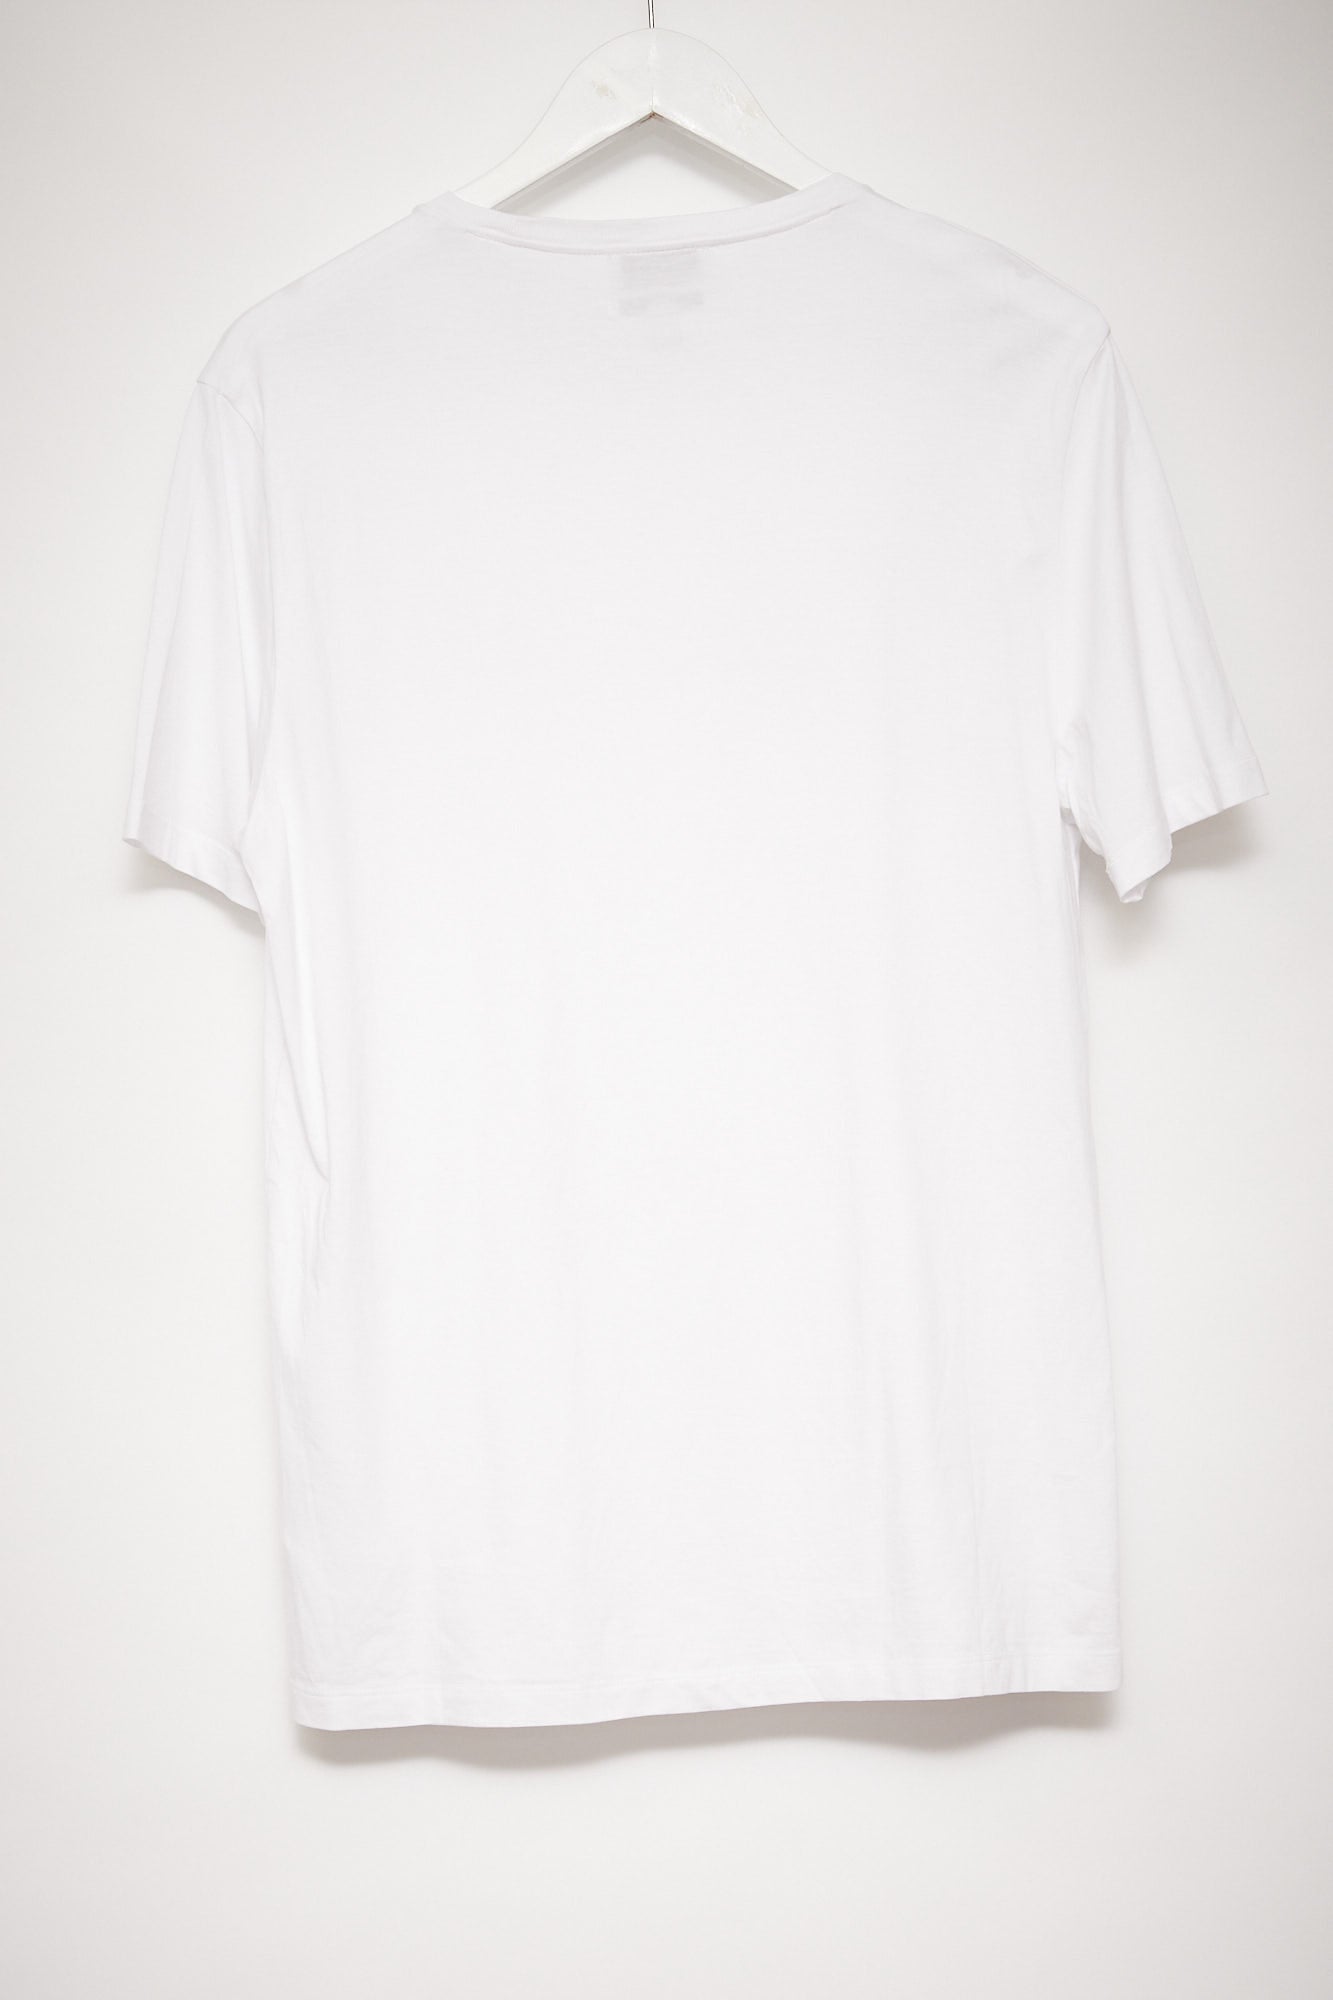 Mens Cos Relaxed Fit White T-shirt size Medium